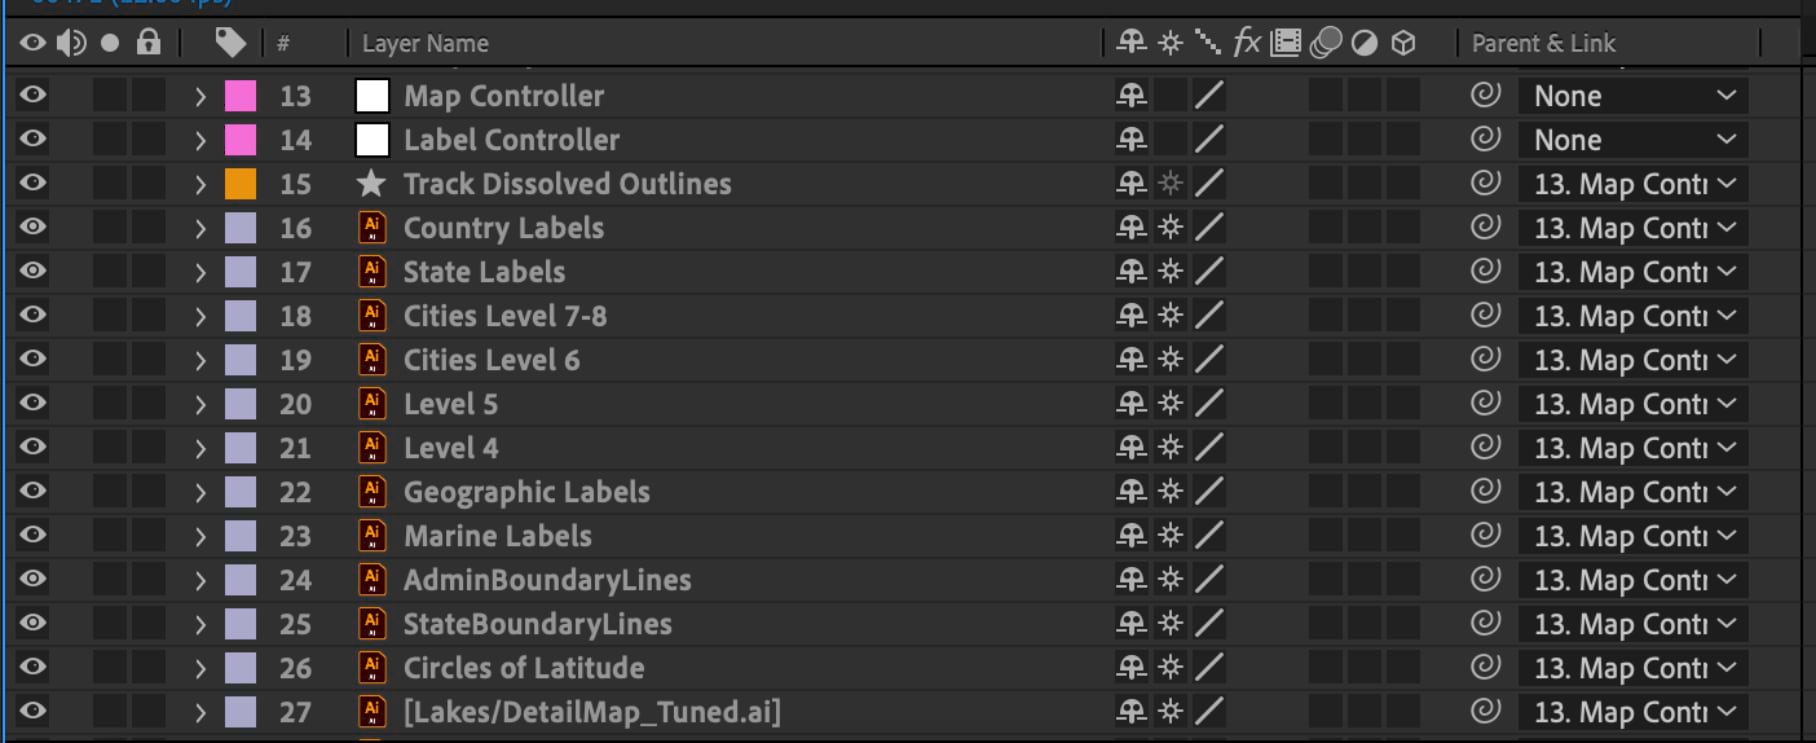 Screenshot of layer list in Adobe After Effects showing the layers imported from Adobe Illustrator.